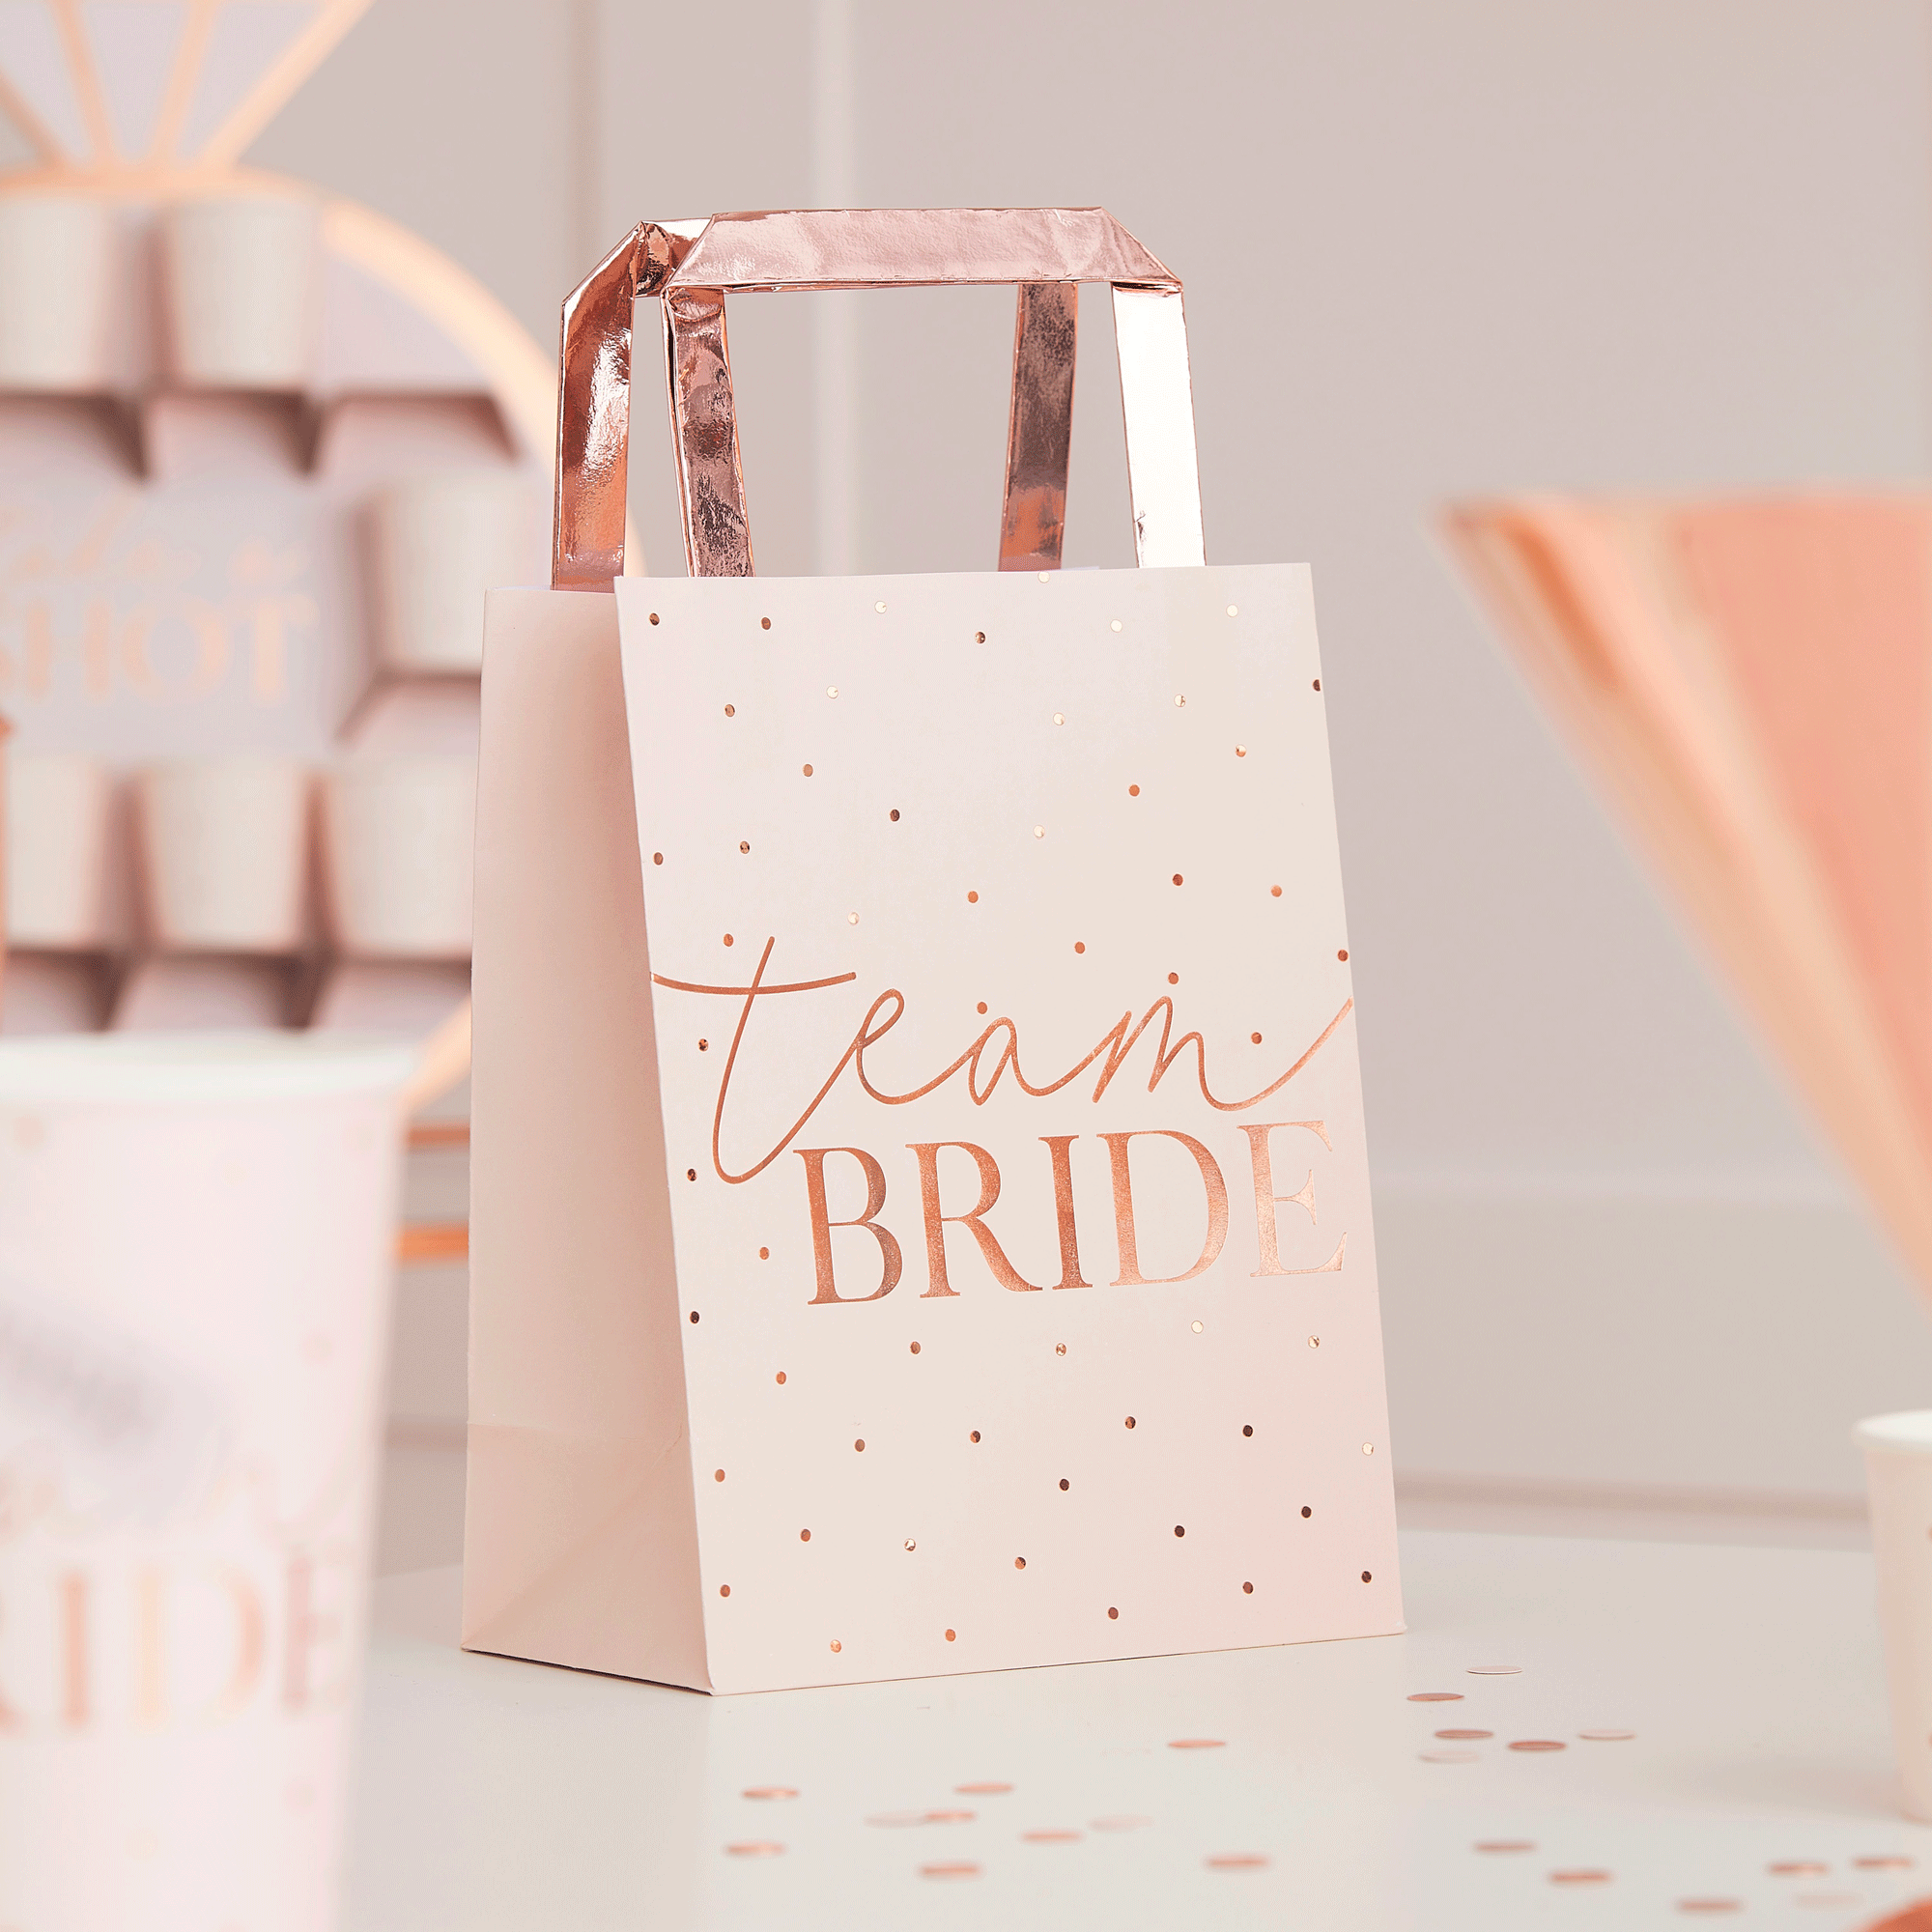 Pink Team Bride Rose Gold Foiled Hen Party Bags